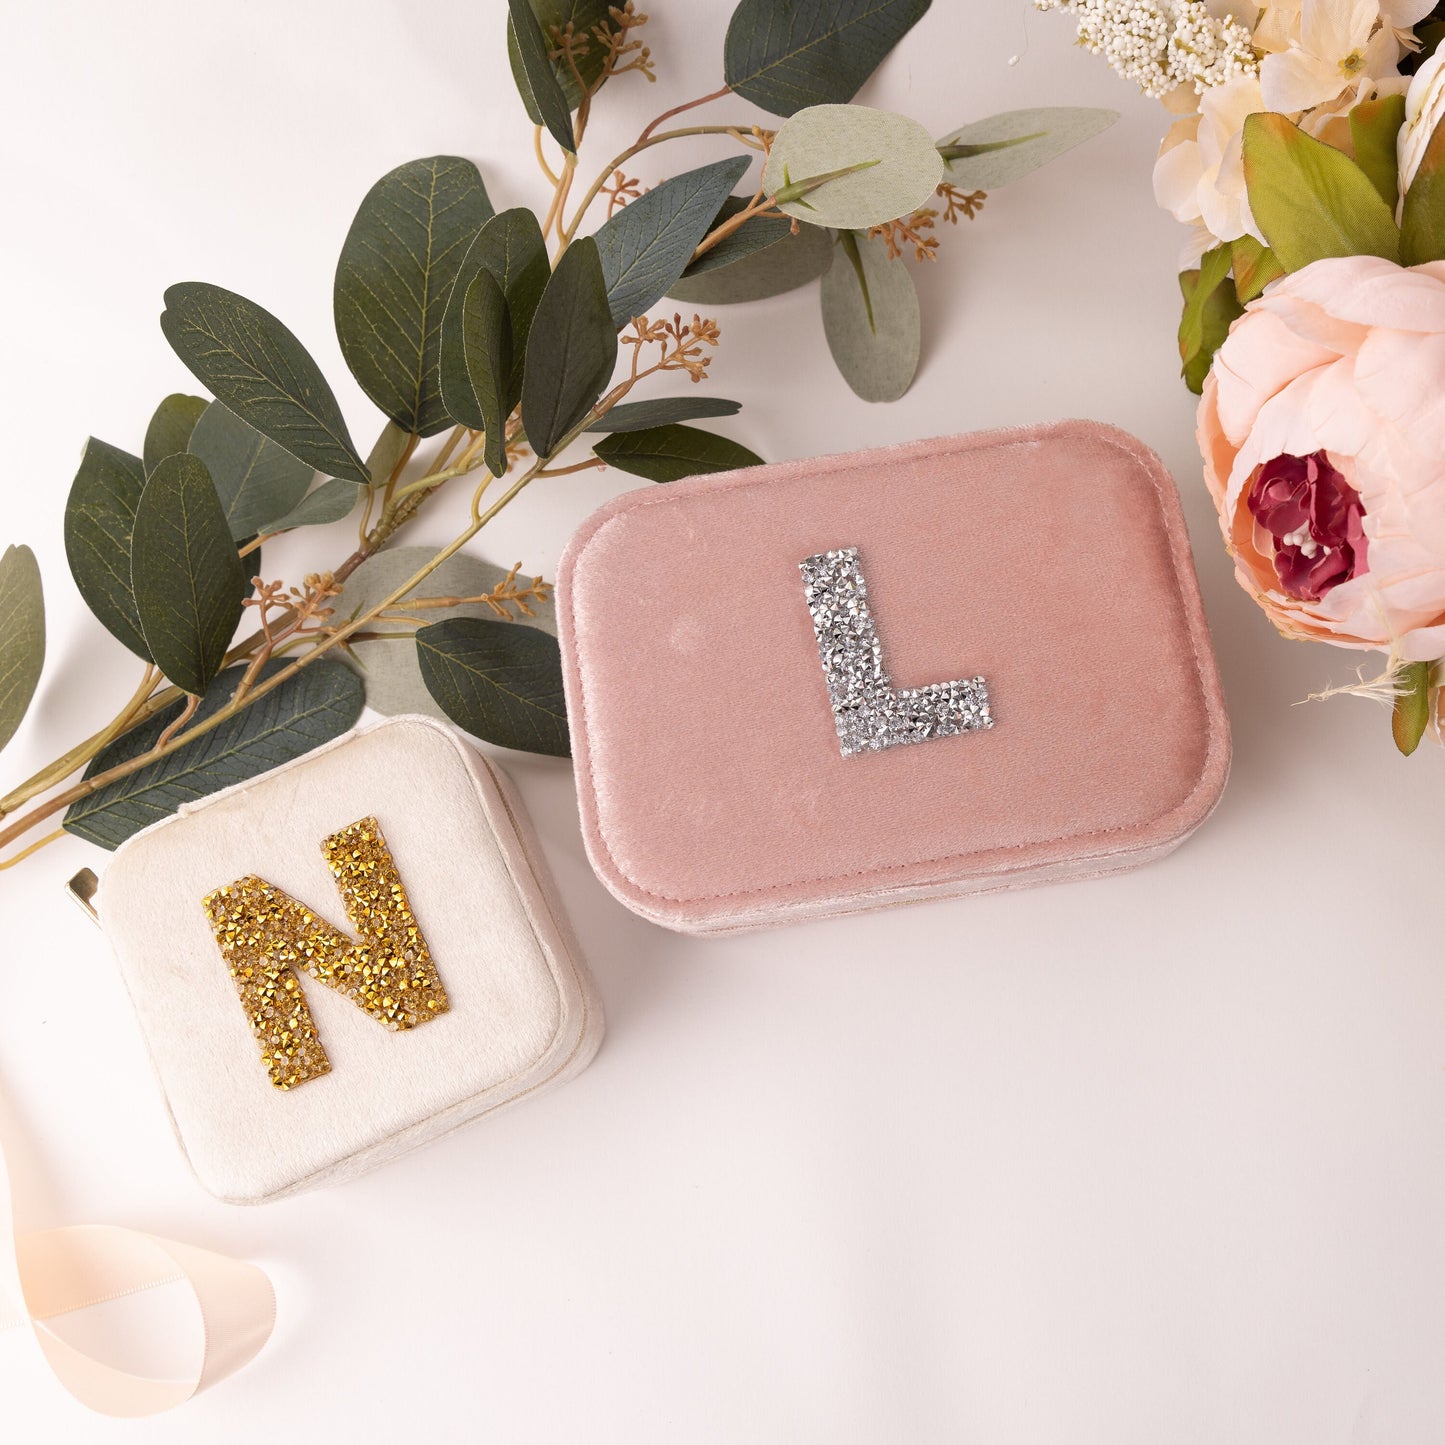 Rhinestone Initial Velvet Jewelry Box - Build Your Own Gift Box - Add On